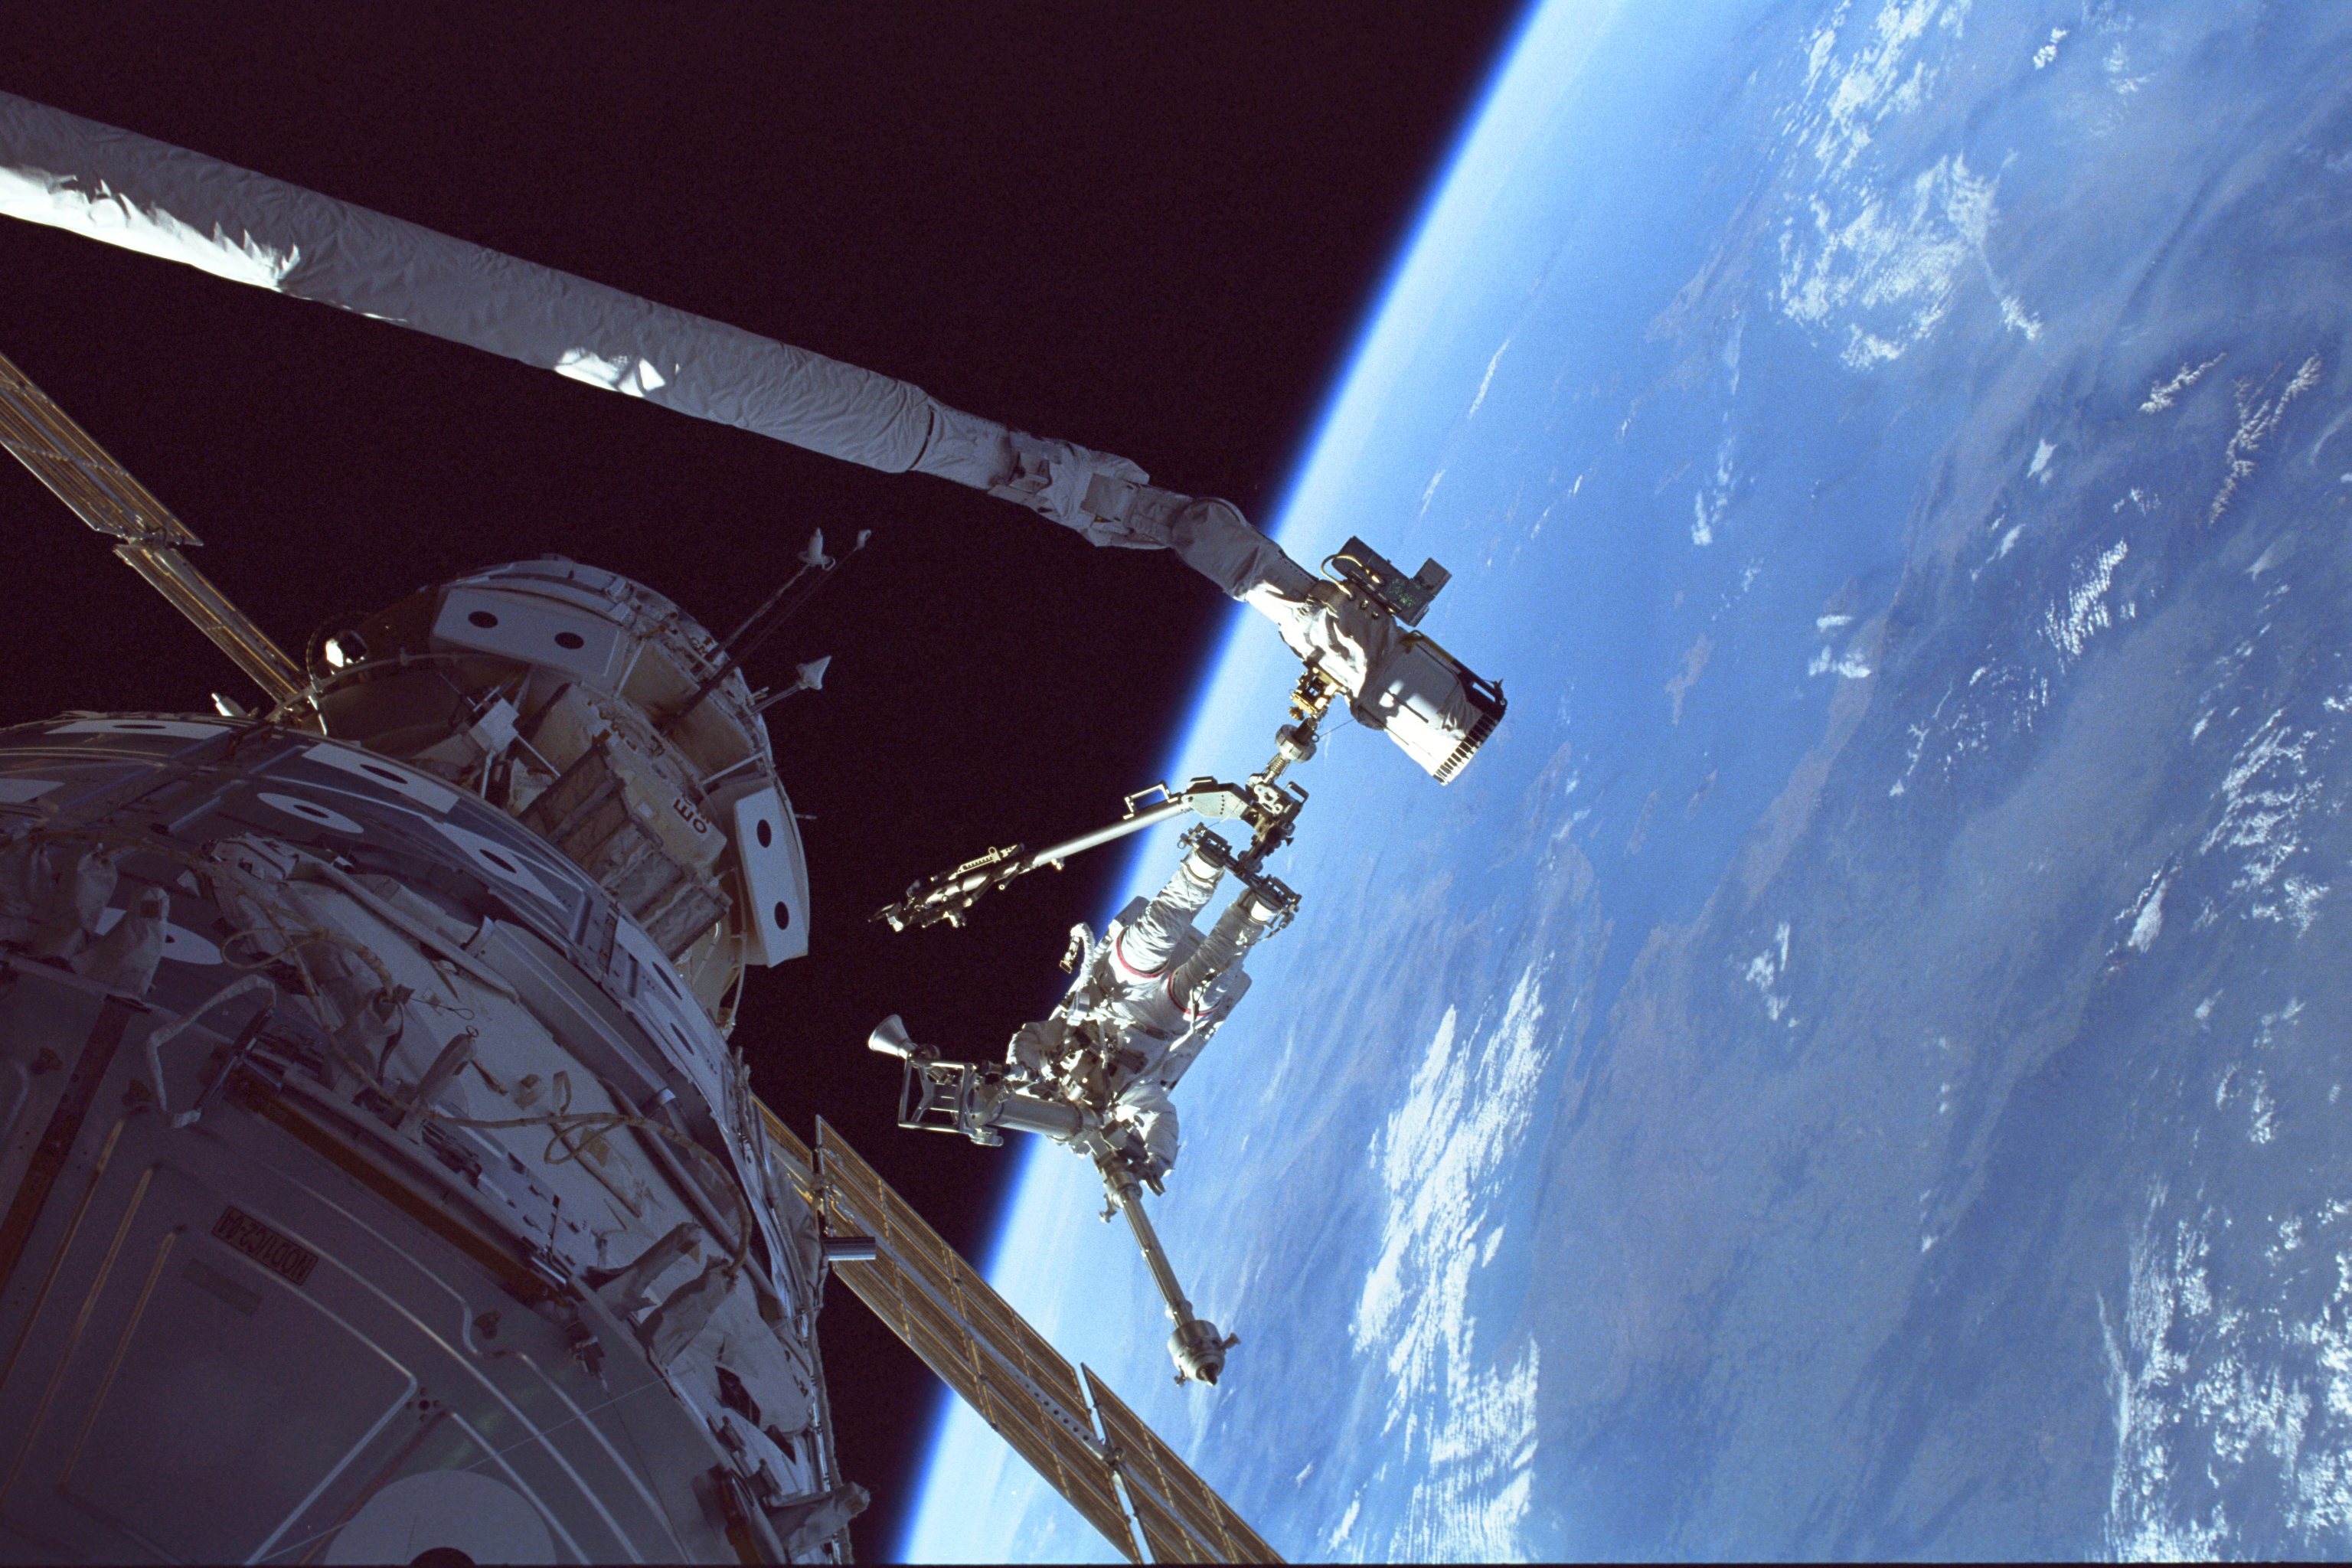 The Shuttle Discovery and the STS-96 crew made history in May 1999 when they became the first crew and orbiter to visit the International Space Station. Here, the Aegean Sea is the back drop for mission specialist Tamara E. Jernigan as she handles the American-built crane, which she later helped to install on the Station during a May 30 spacewalk. Jernigan's feet are anchored to a mobile foot restraint connected to Discovery's Canadian-built robot arm. Photo: NASA